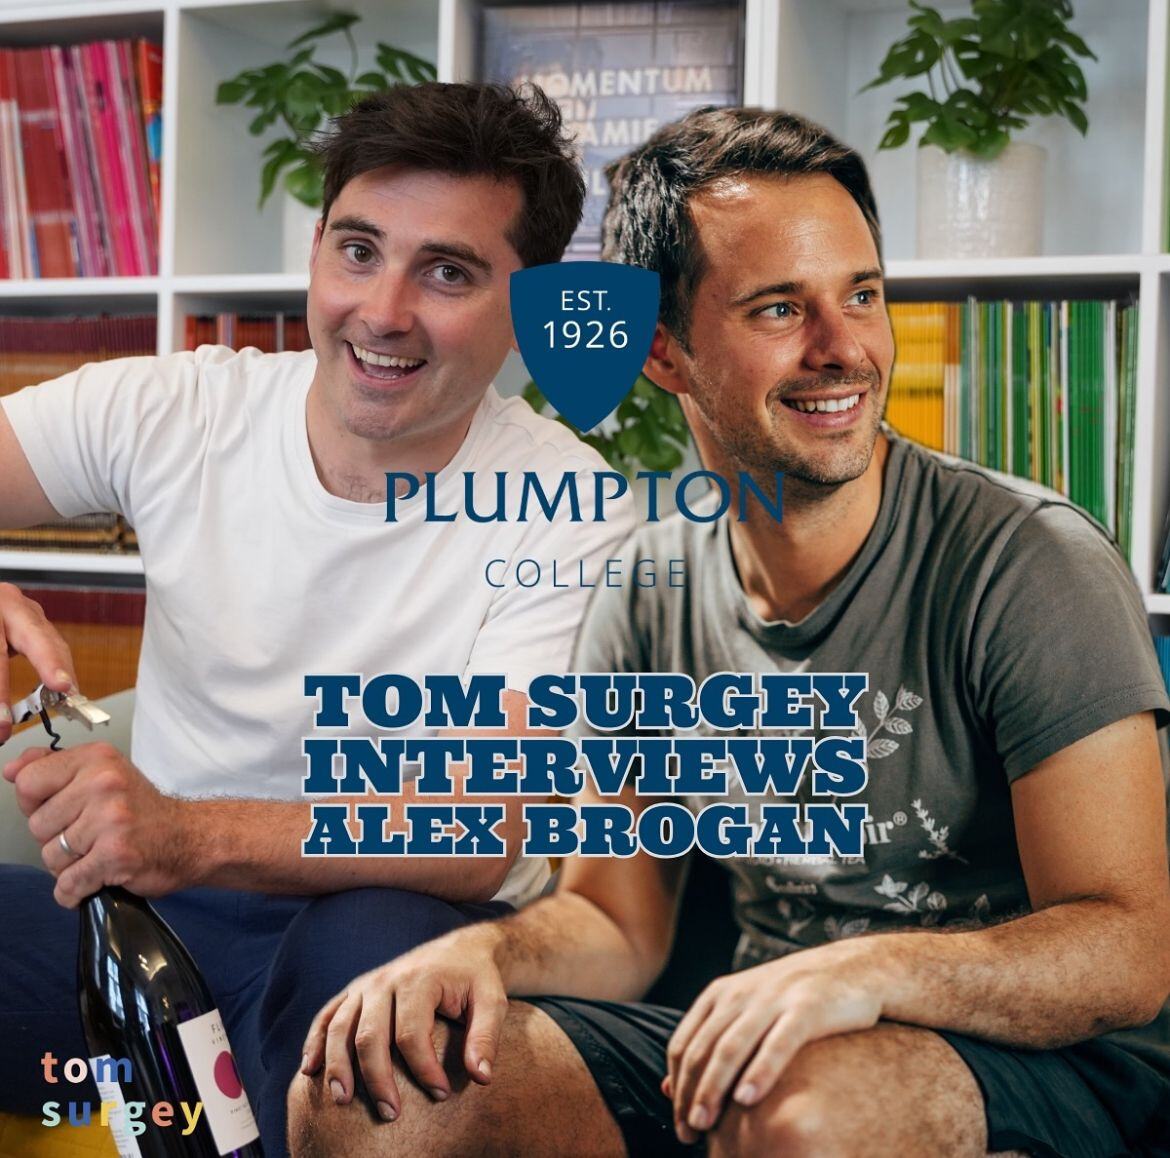 Just one week until @TomSurgey next Instagram Live with special guest and Plumpton College alumni Alex Brogan! To learn more about Alex's super interesting career be sure to tune in on Wednesday 15th May at 7pm on Tom's Instagram! #TomSurgey #NotYetNamedWineCo #PlumptonCollege